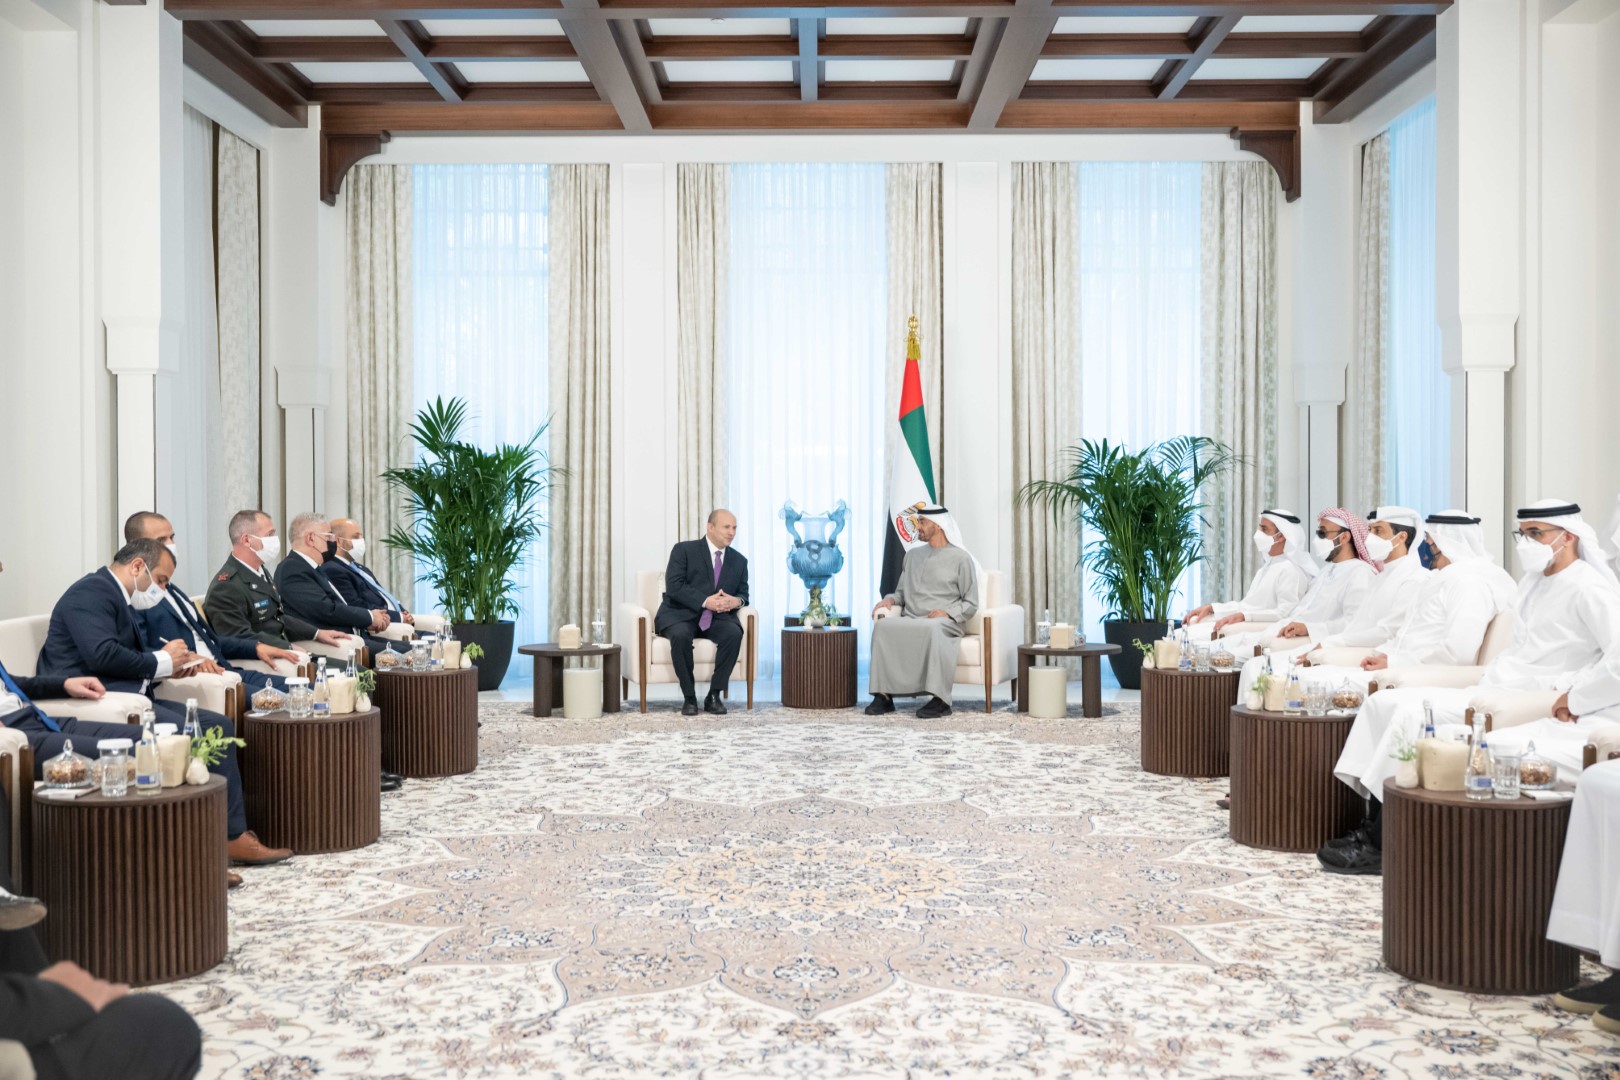 Israel’s Prime Minister met with the UAE’s President during an official visit to Abu Dhabi on Thursday